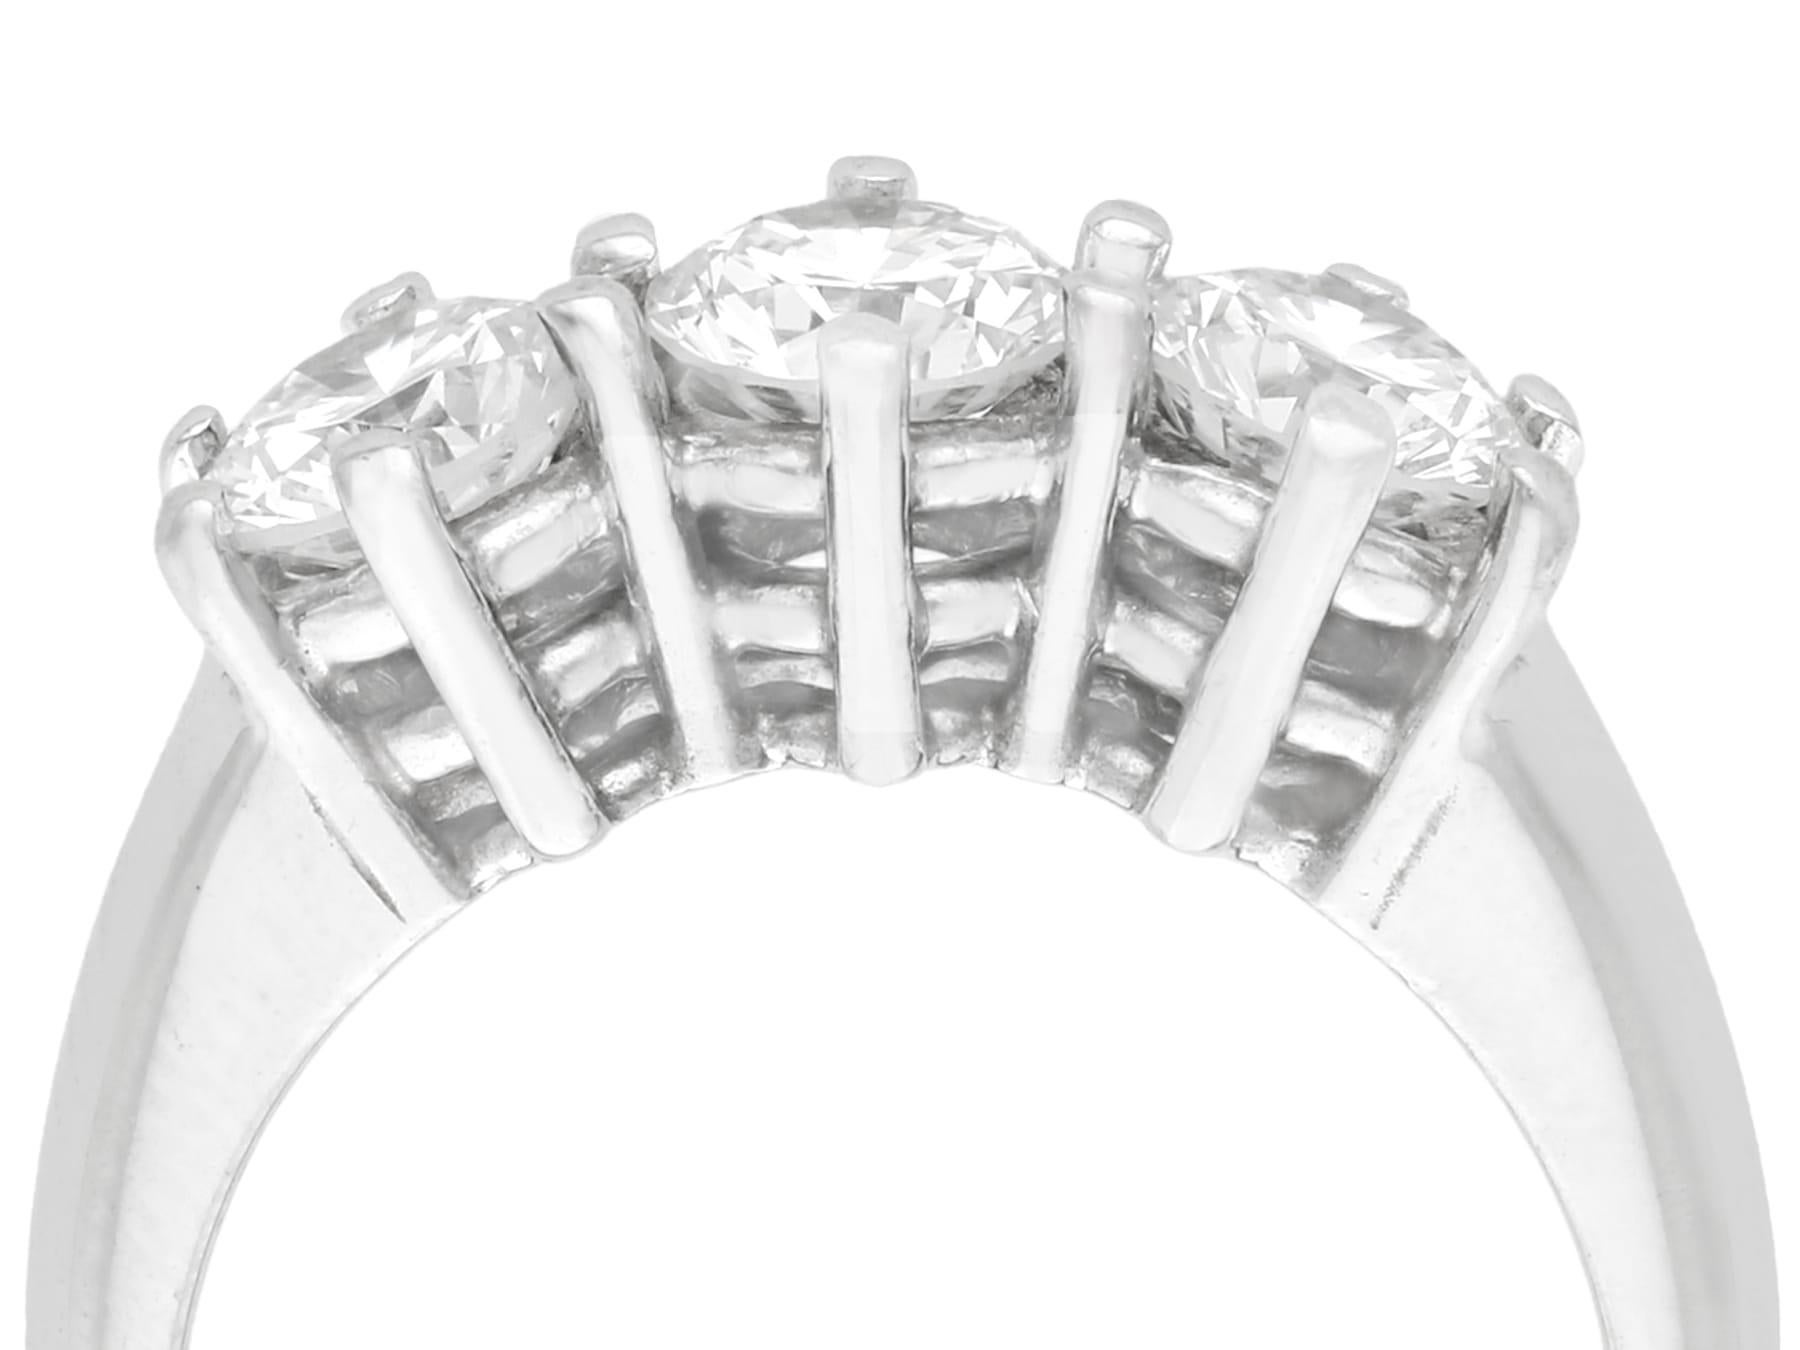 A fine and impressive 1.18 carat diamond and 18 karat white gold three stone / trilogy ring; part of our vintage jewelry and estate jewelry collections.

This fine and impressive diamond trilogy ring has been crafted in 18k white gold.

The pierced